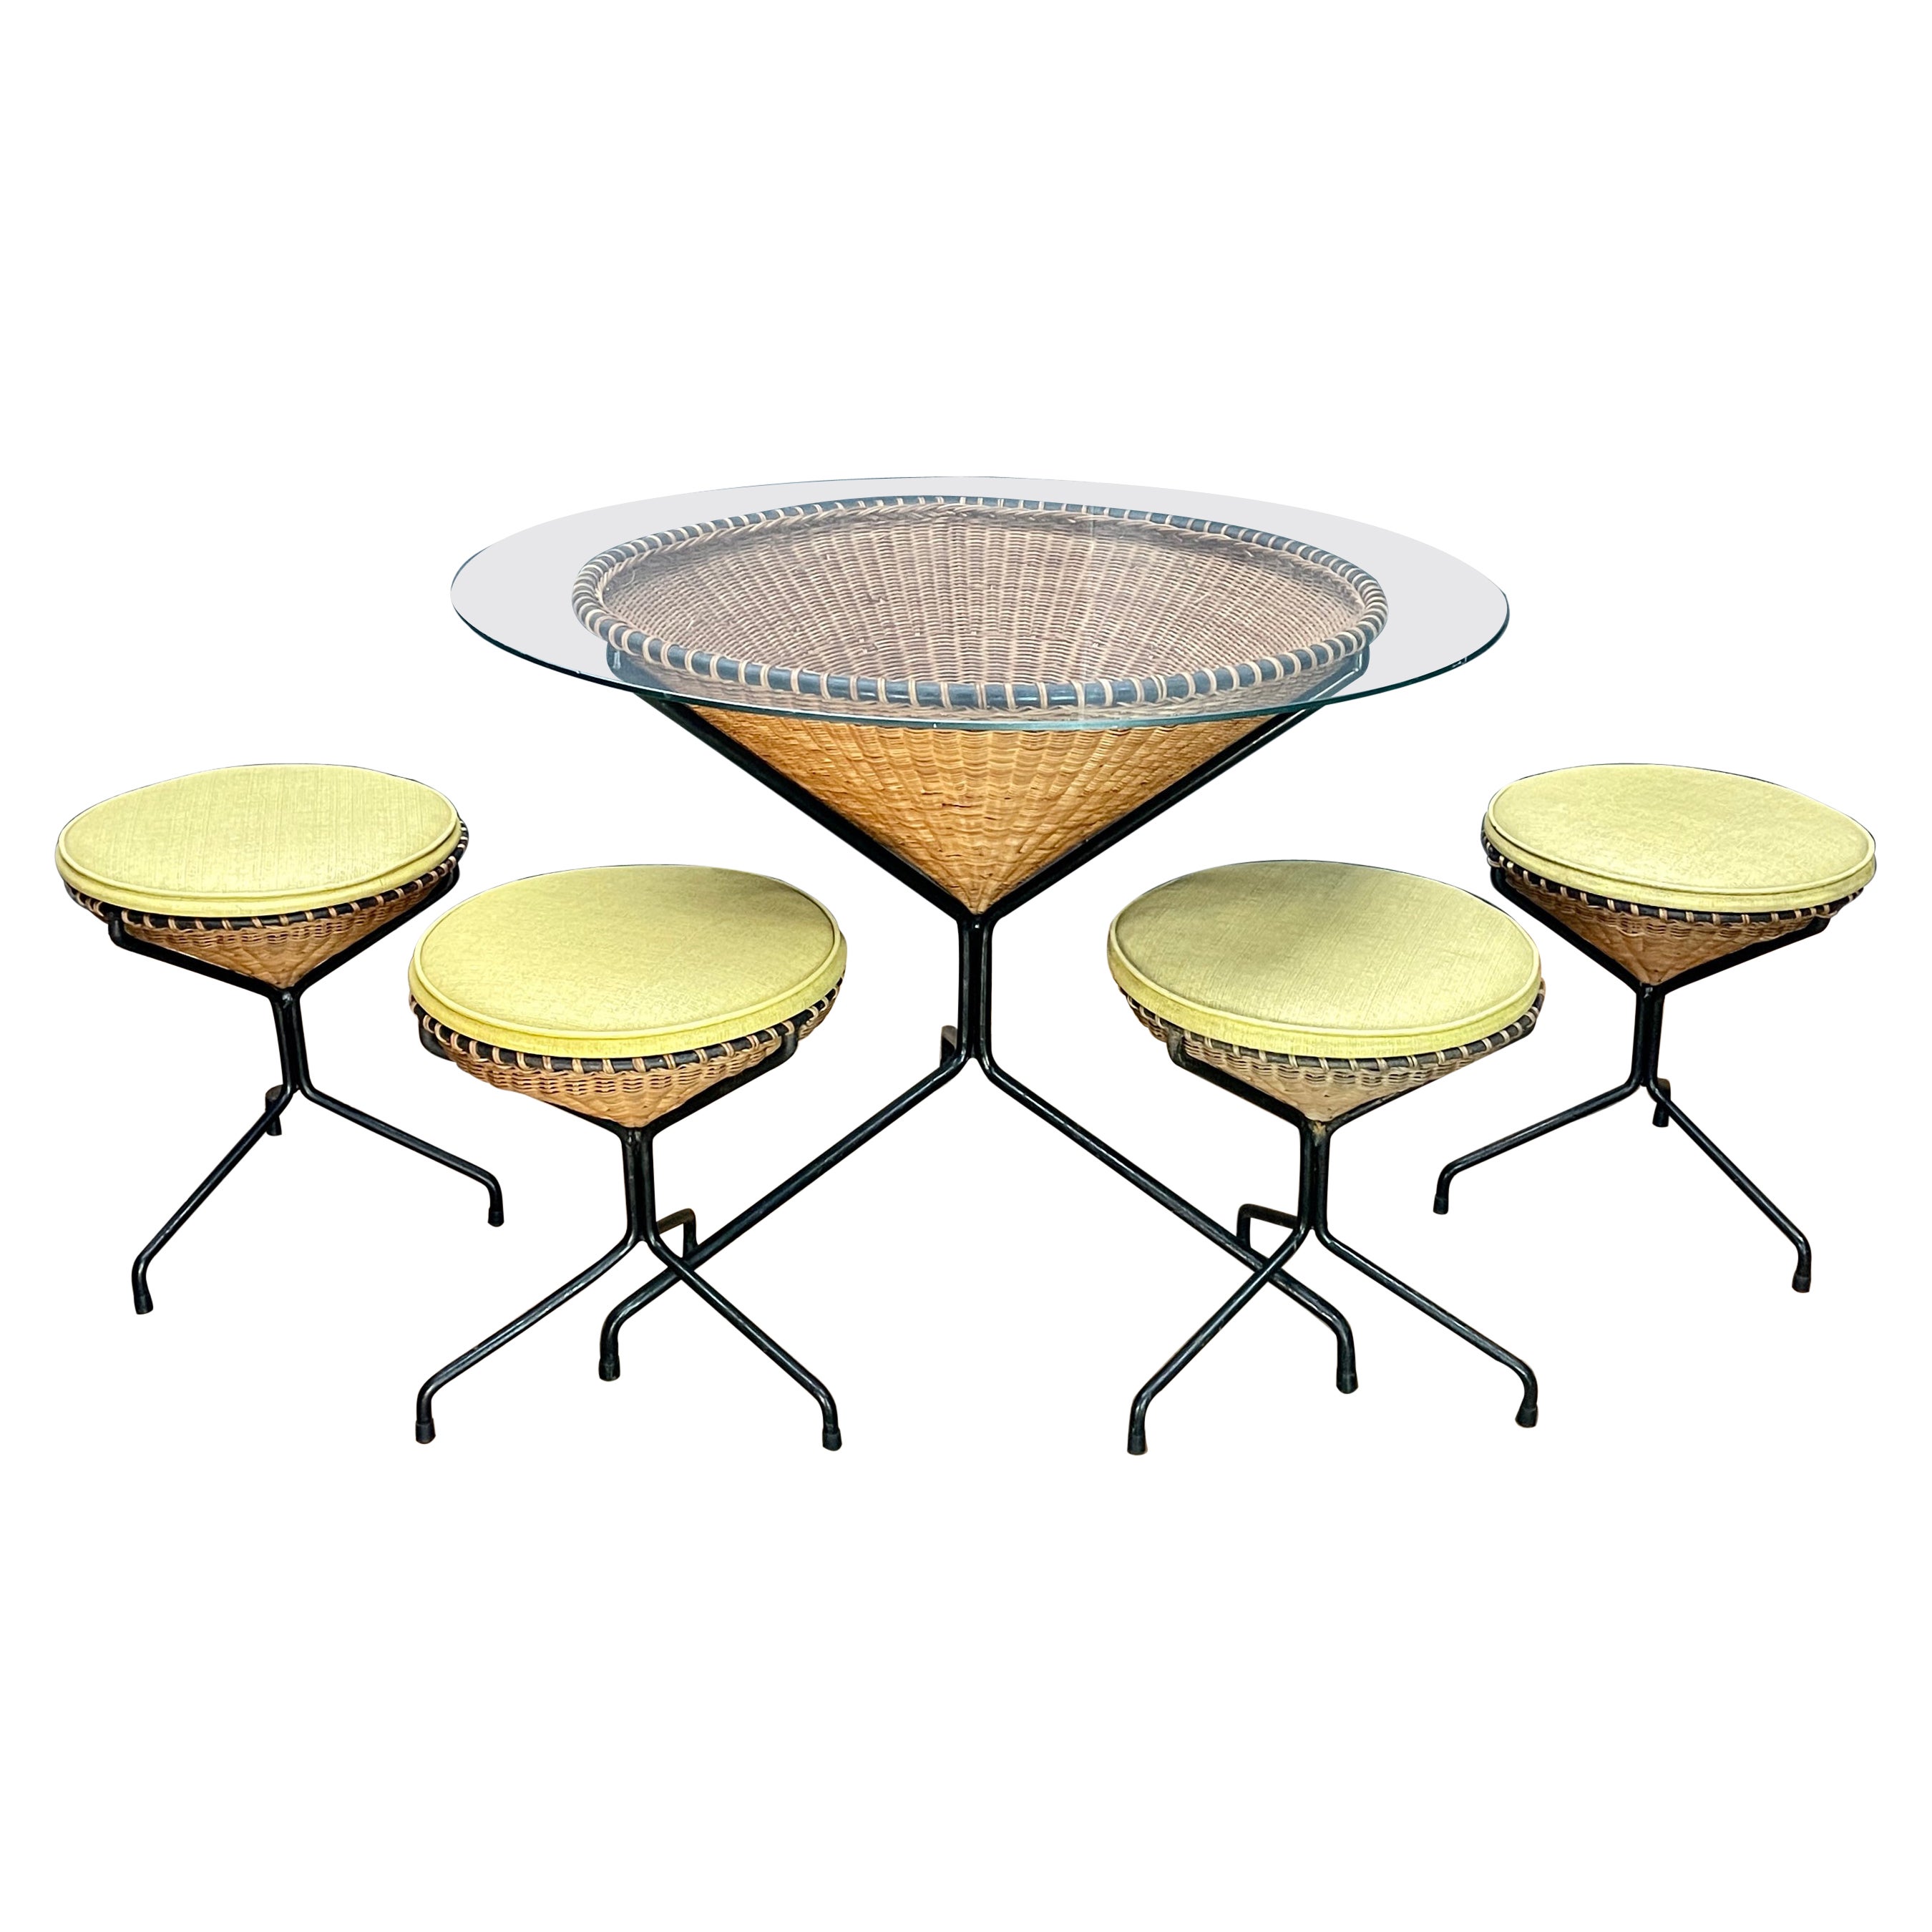 1950s California Design Danny Ho Fong Wicker Iron Tiki Dining Table Stool Set For Sale